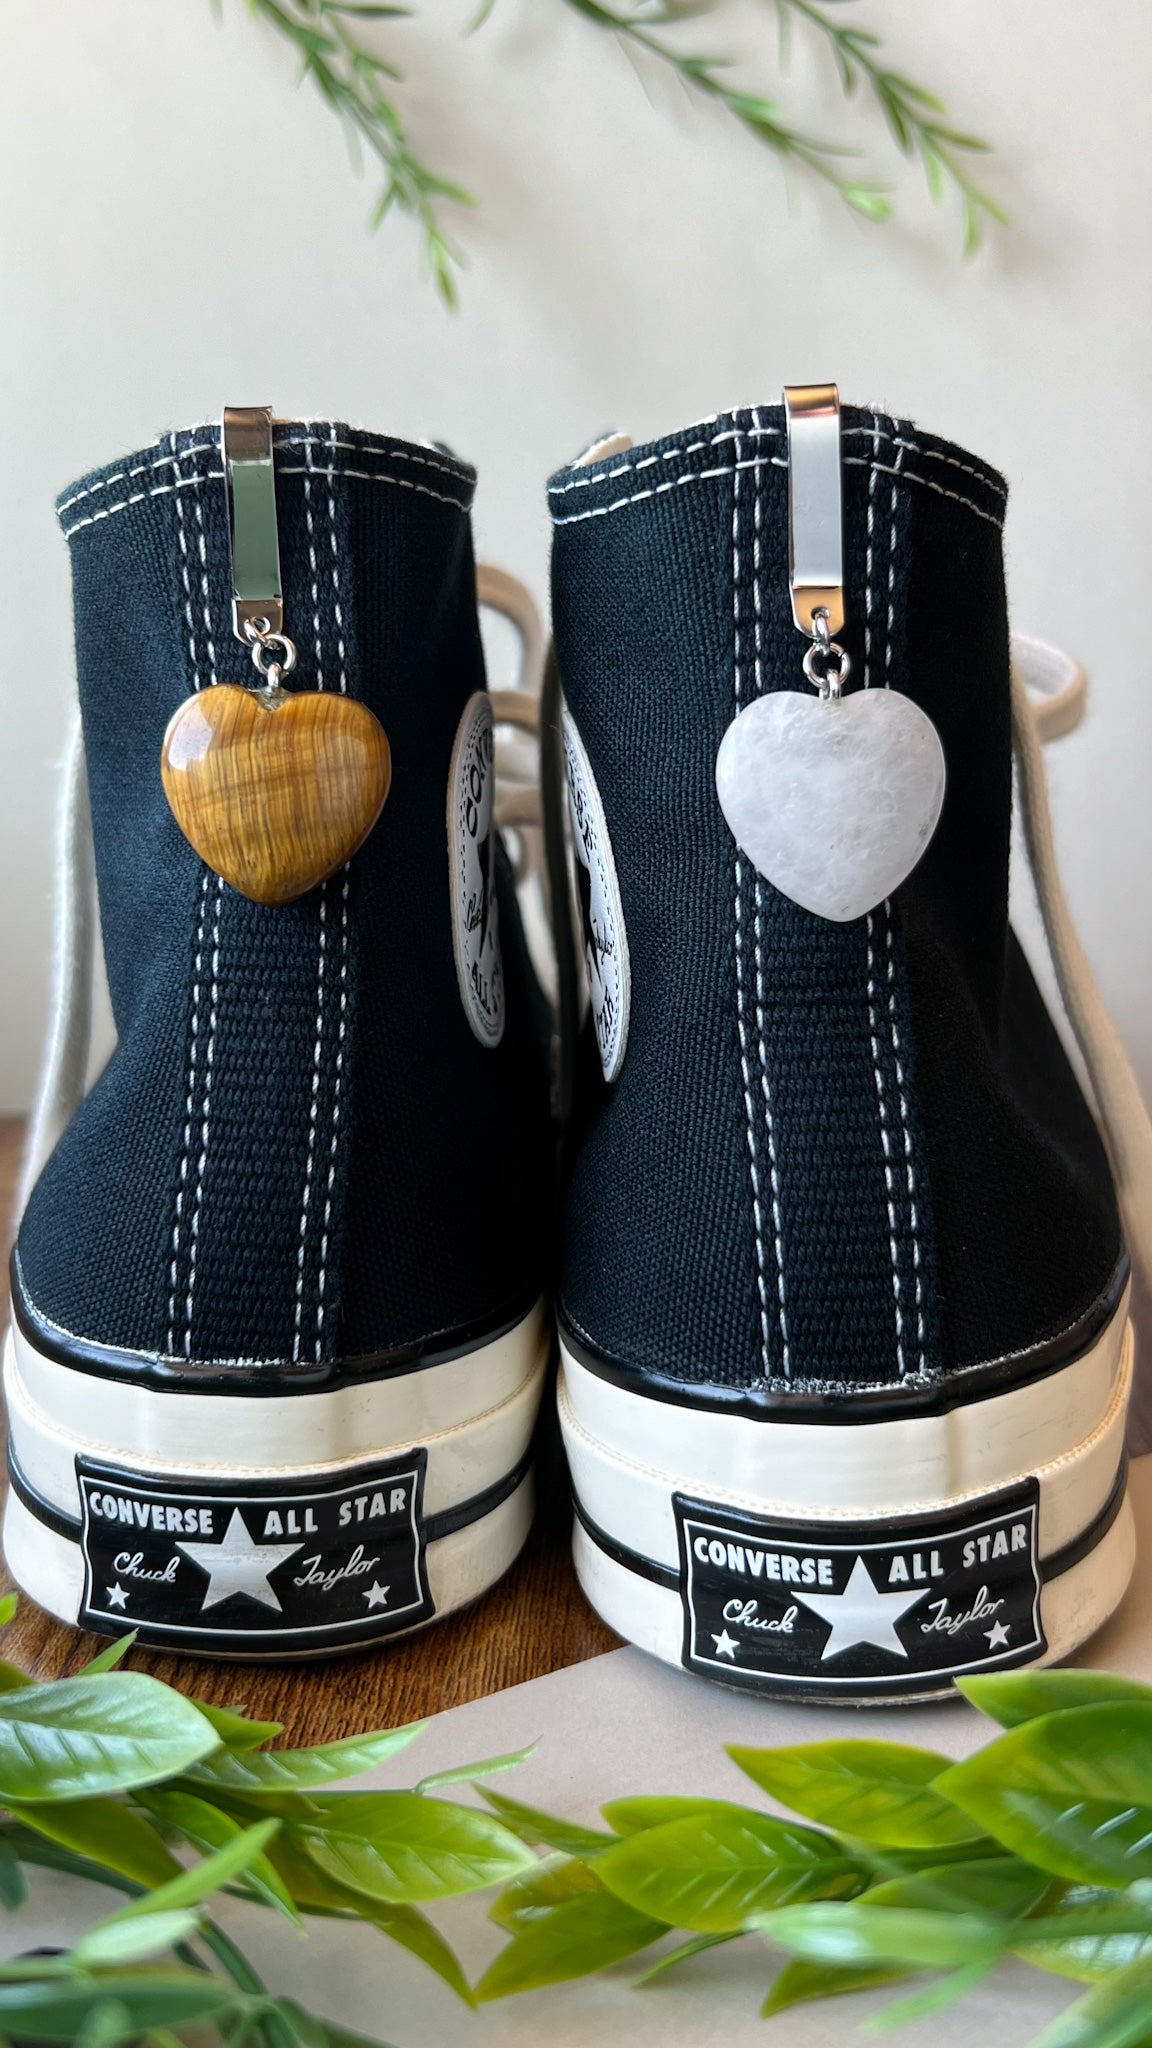 Crystal Heart Shoe Clip, Shoe Charm, High Top Sneaker or Boot Clip, Shoe or Bag Keychain